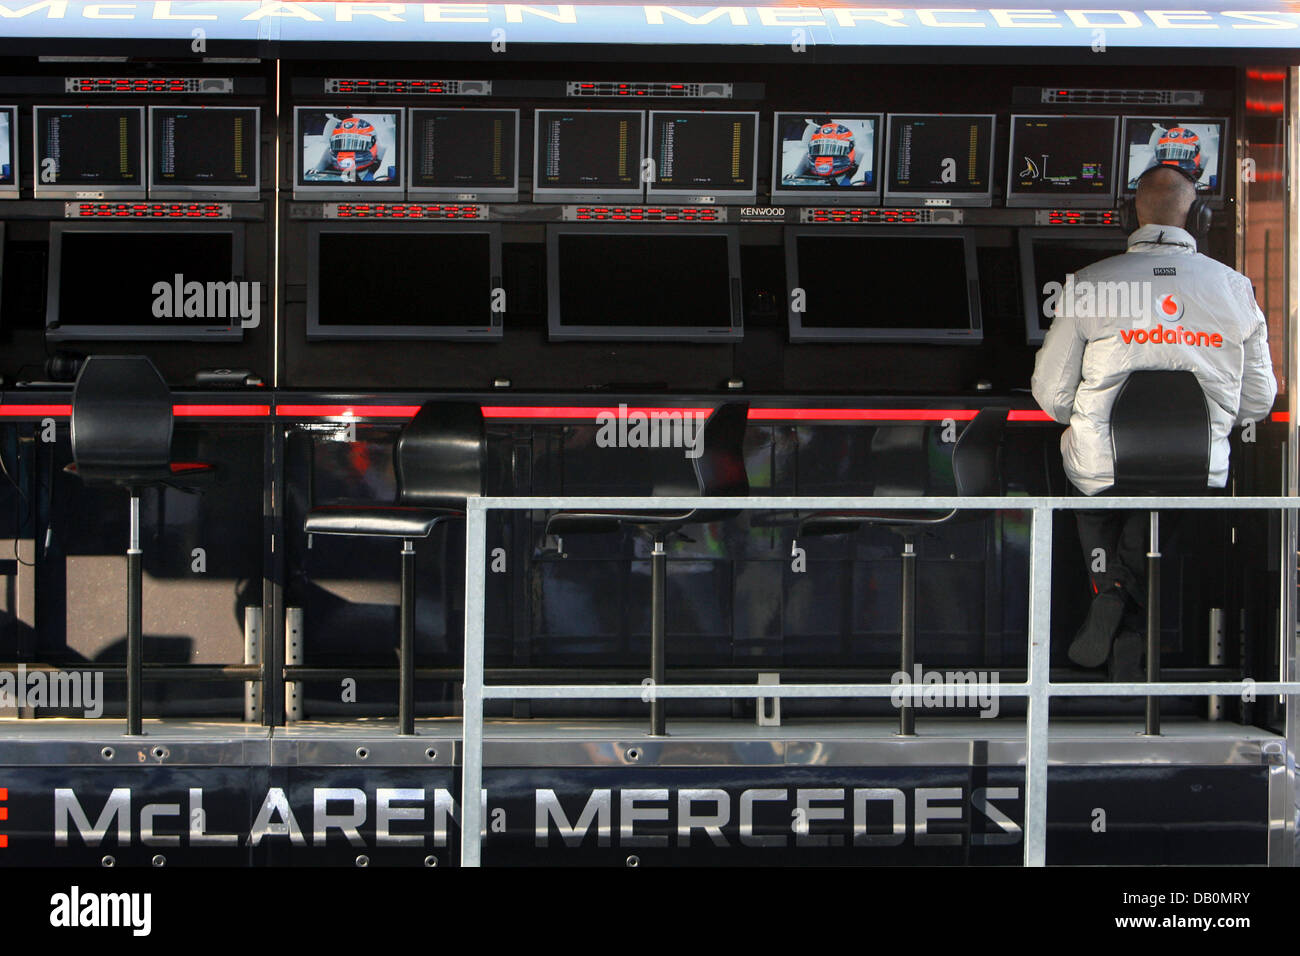 A McLaren Mercedes team member follows the first practice session from the control booth at the race circuit in Spa-Francorchamps, Belgium, 14 September 2007. The 2007 Formula 1 Belgian Grand Prix will be held on 16 September 2007. Photo: Jens Buettner Stock Photo